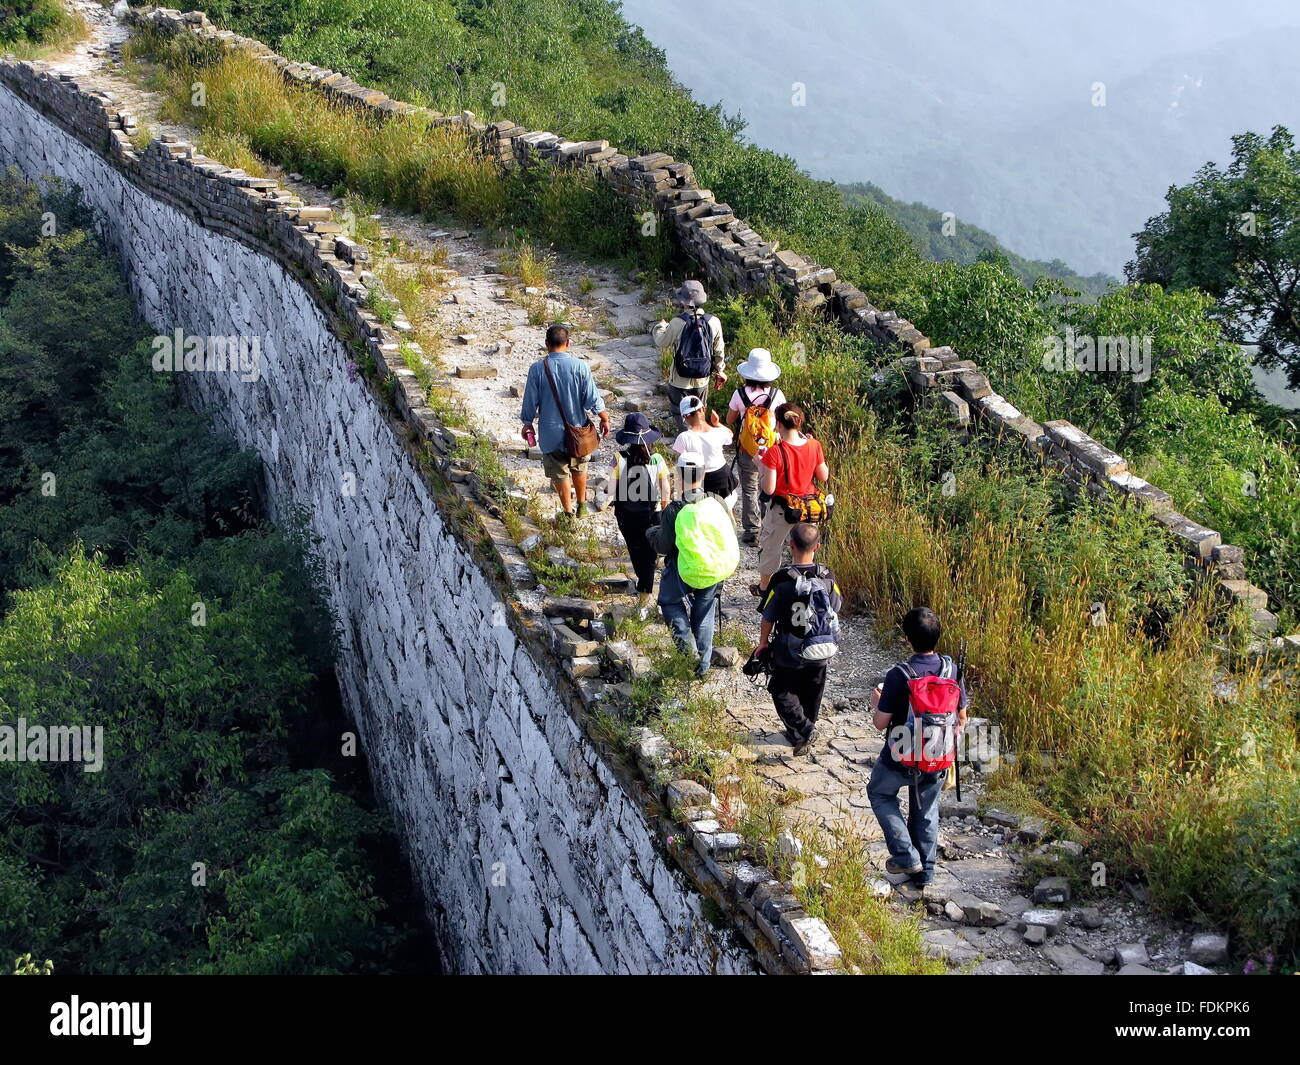 hikers on wild great wall in Beijing Stock Photo